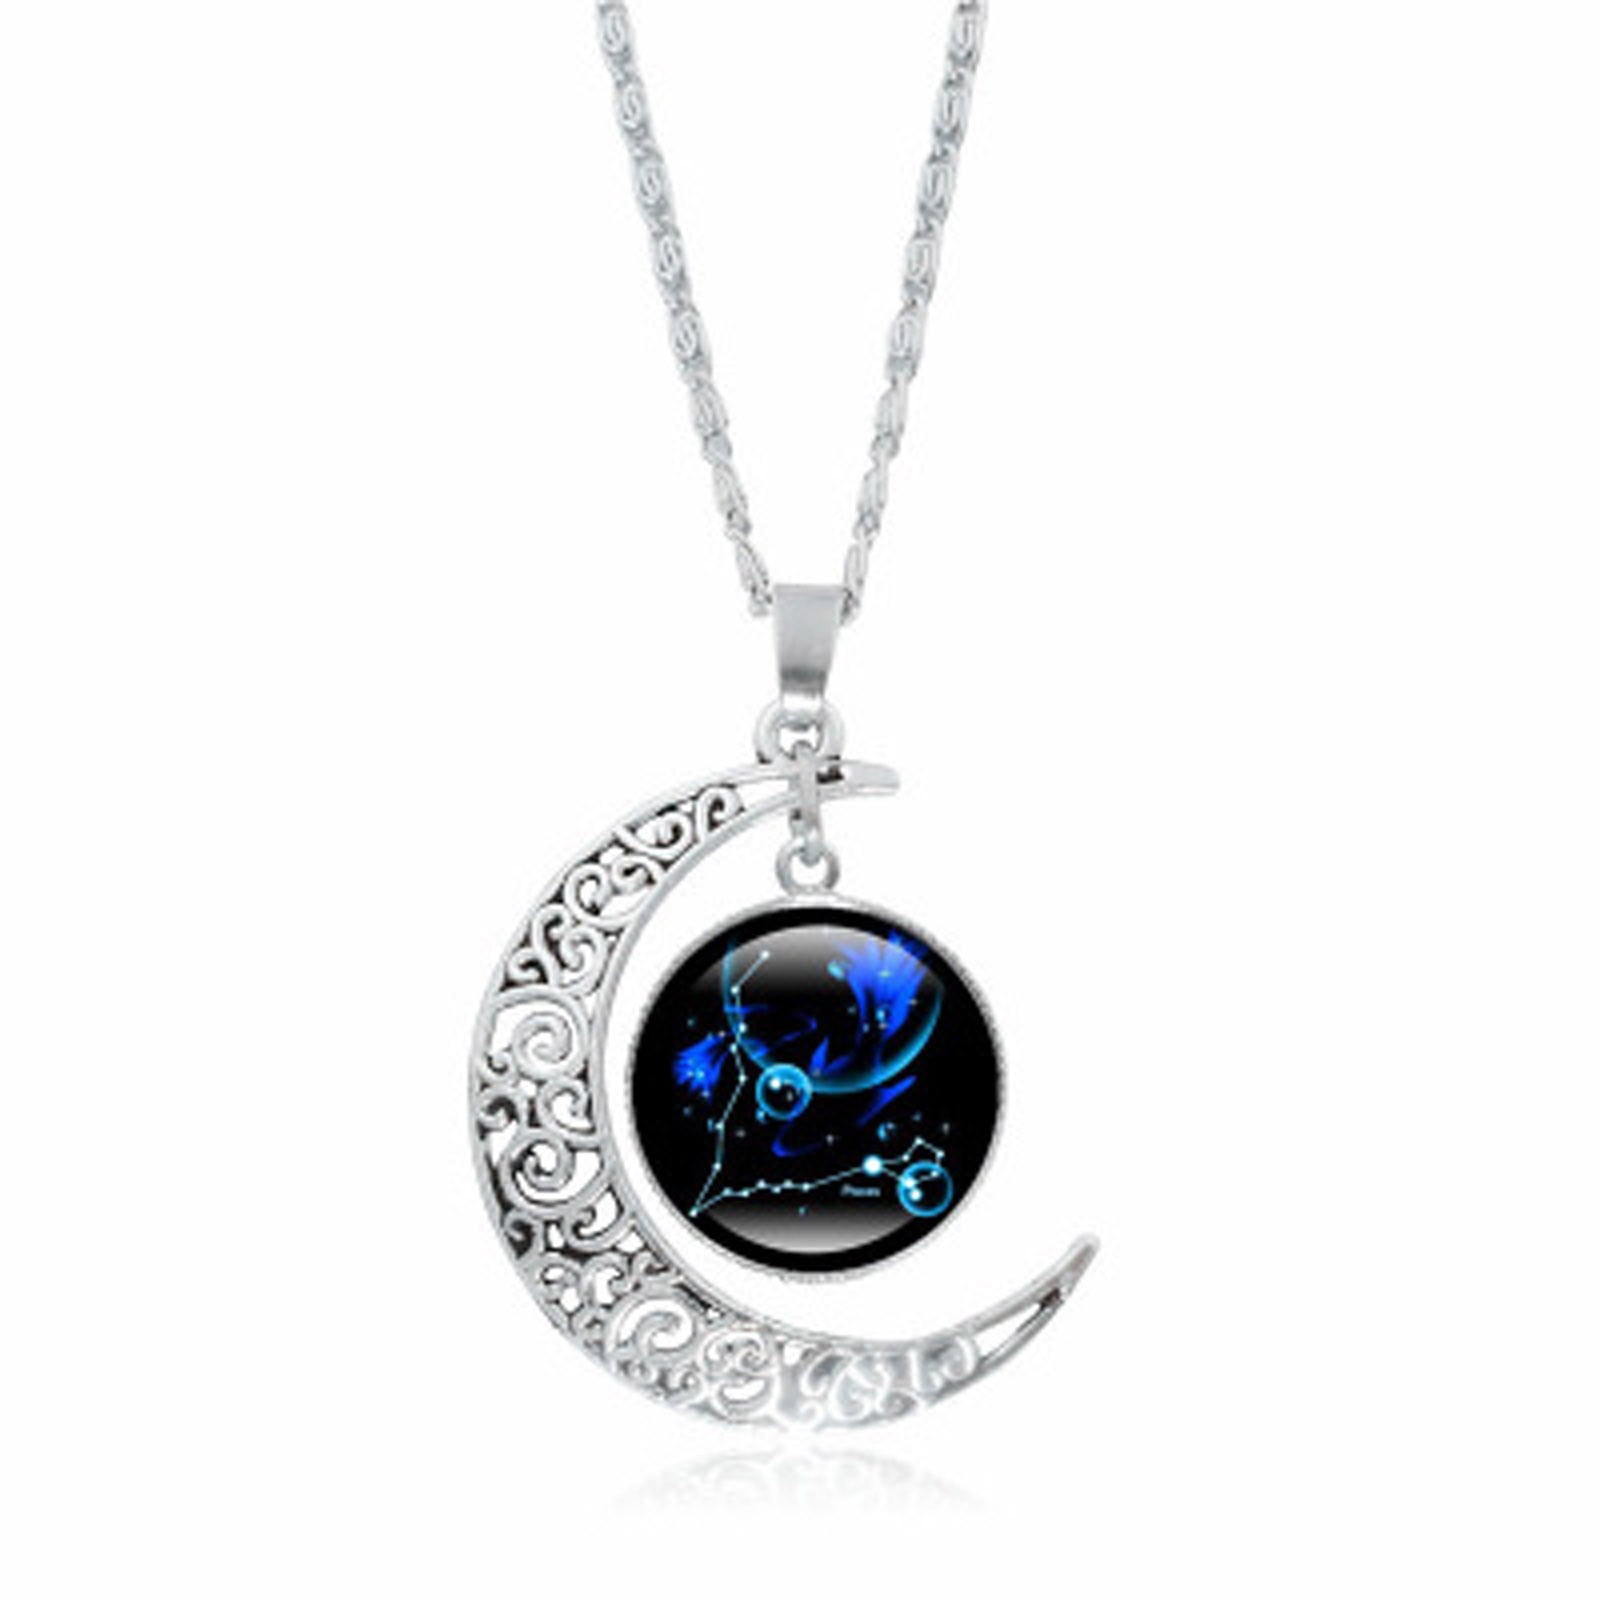 qucoqpe Necklaces for Women Teen Girls 12 Constellation Moon Necklace ...